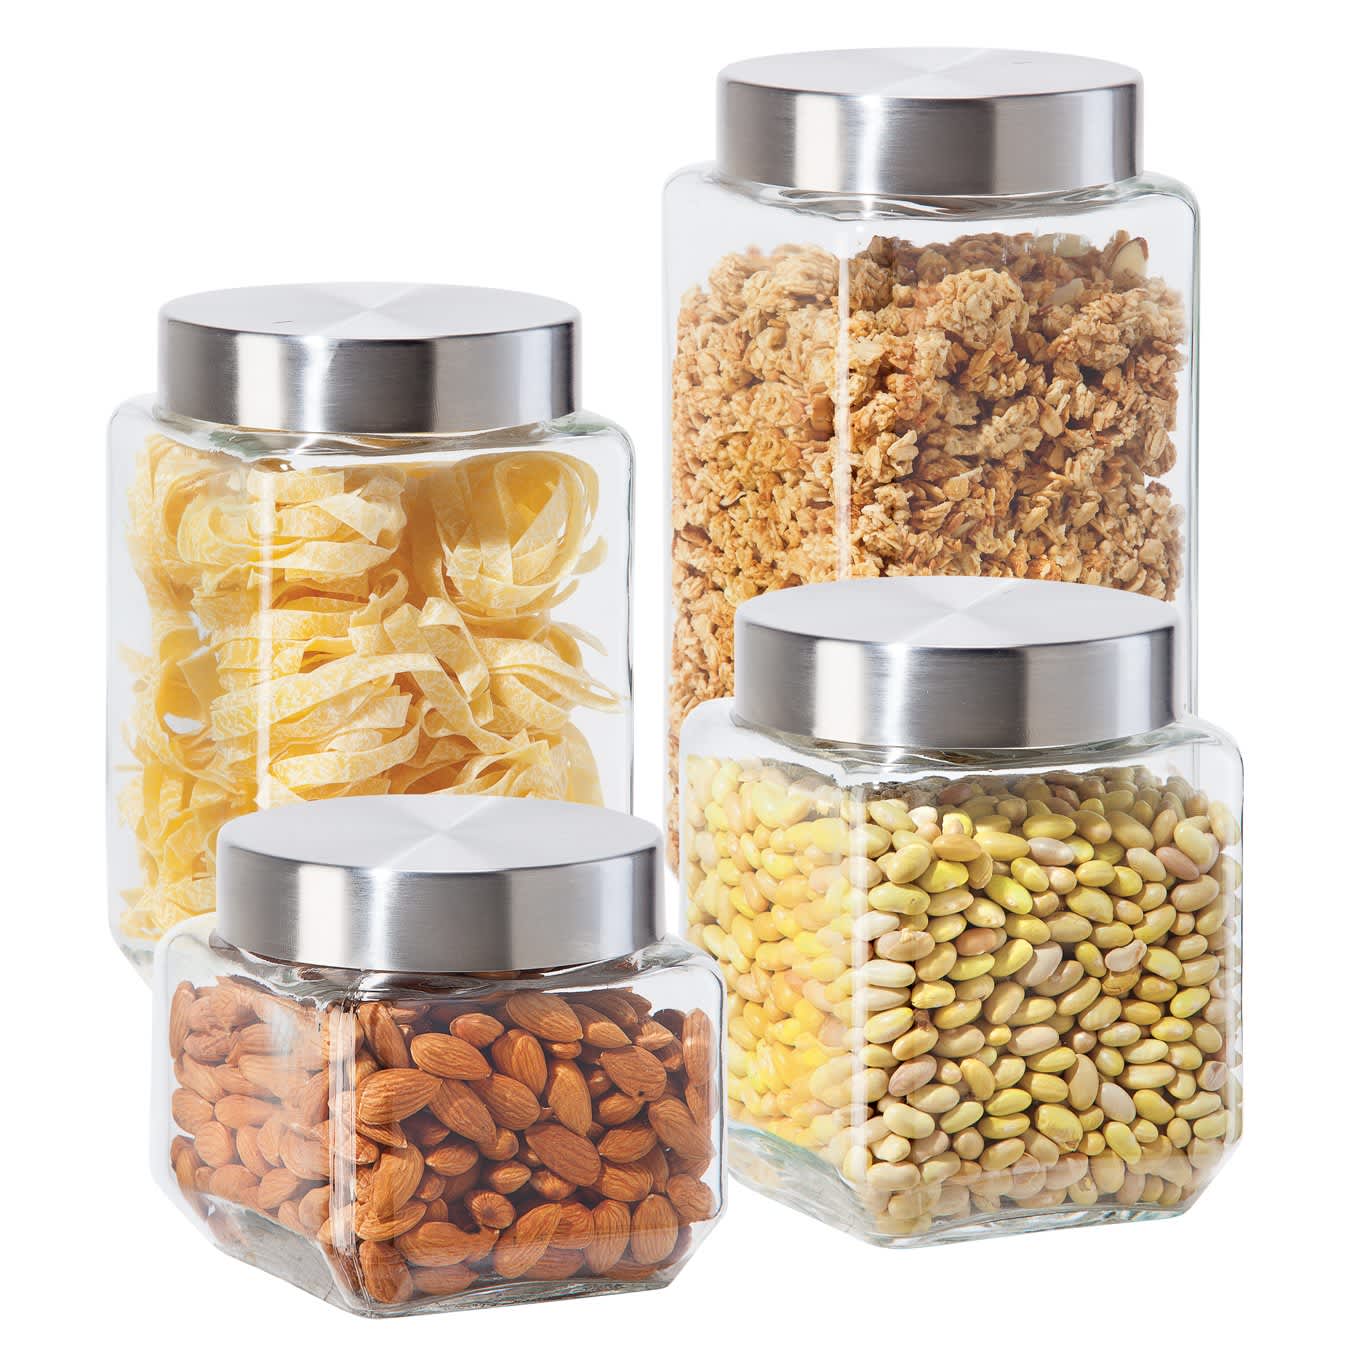 5 Best Airtight Glass Containers for Flour and Sugar You Can Buy in [2022]  